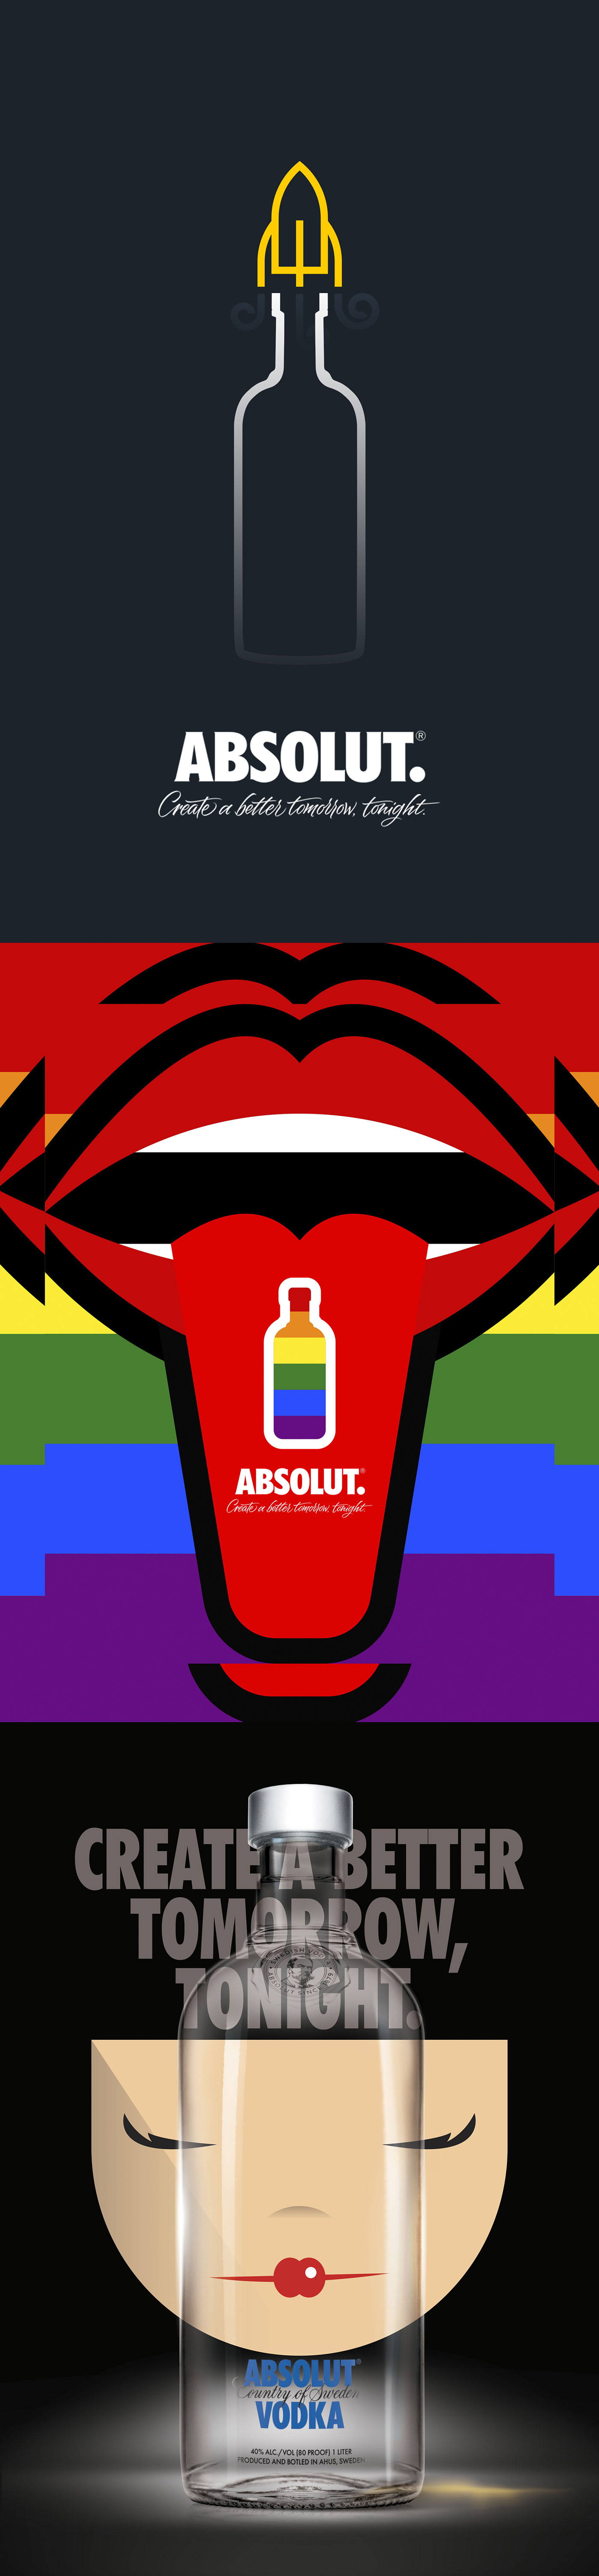 absolut ABSOLUT 2019 ABSOLUT PORTUGAL